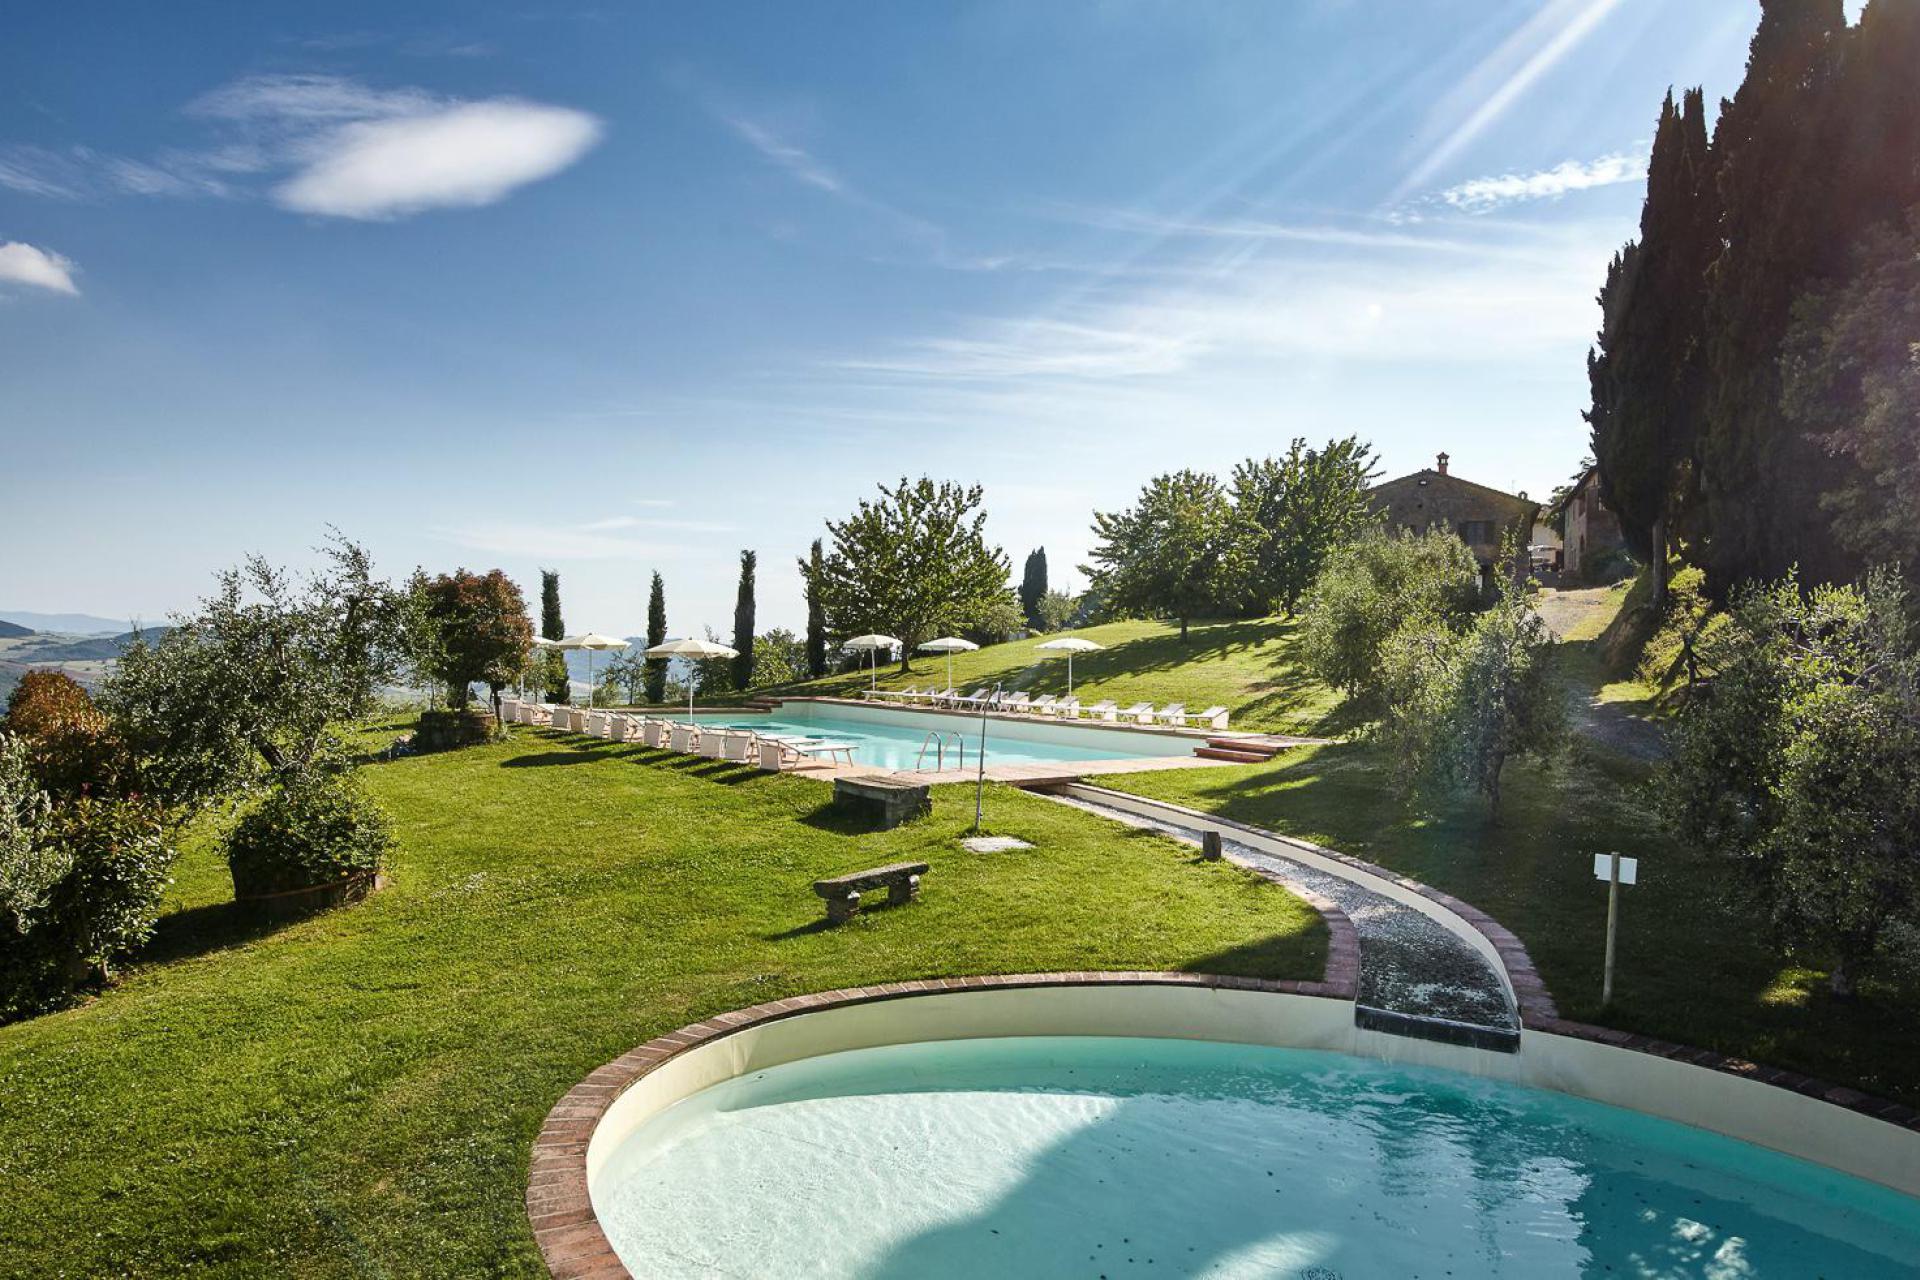 Authentic agriturismo with restaurant within walking distance